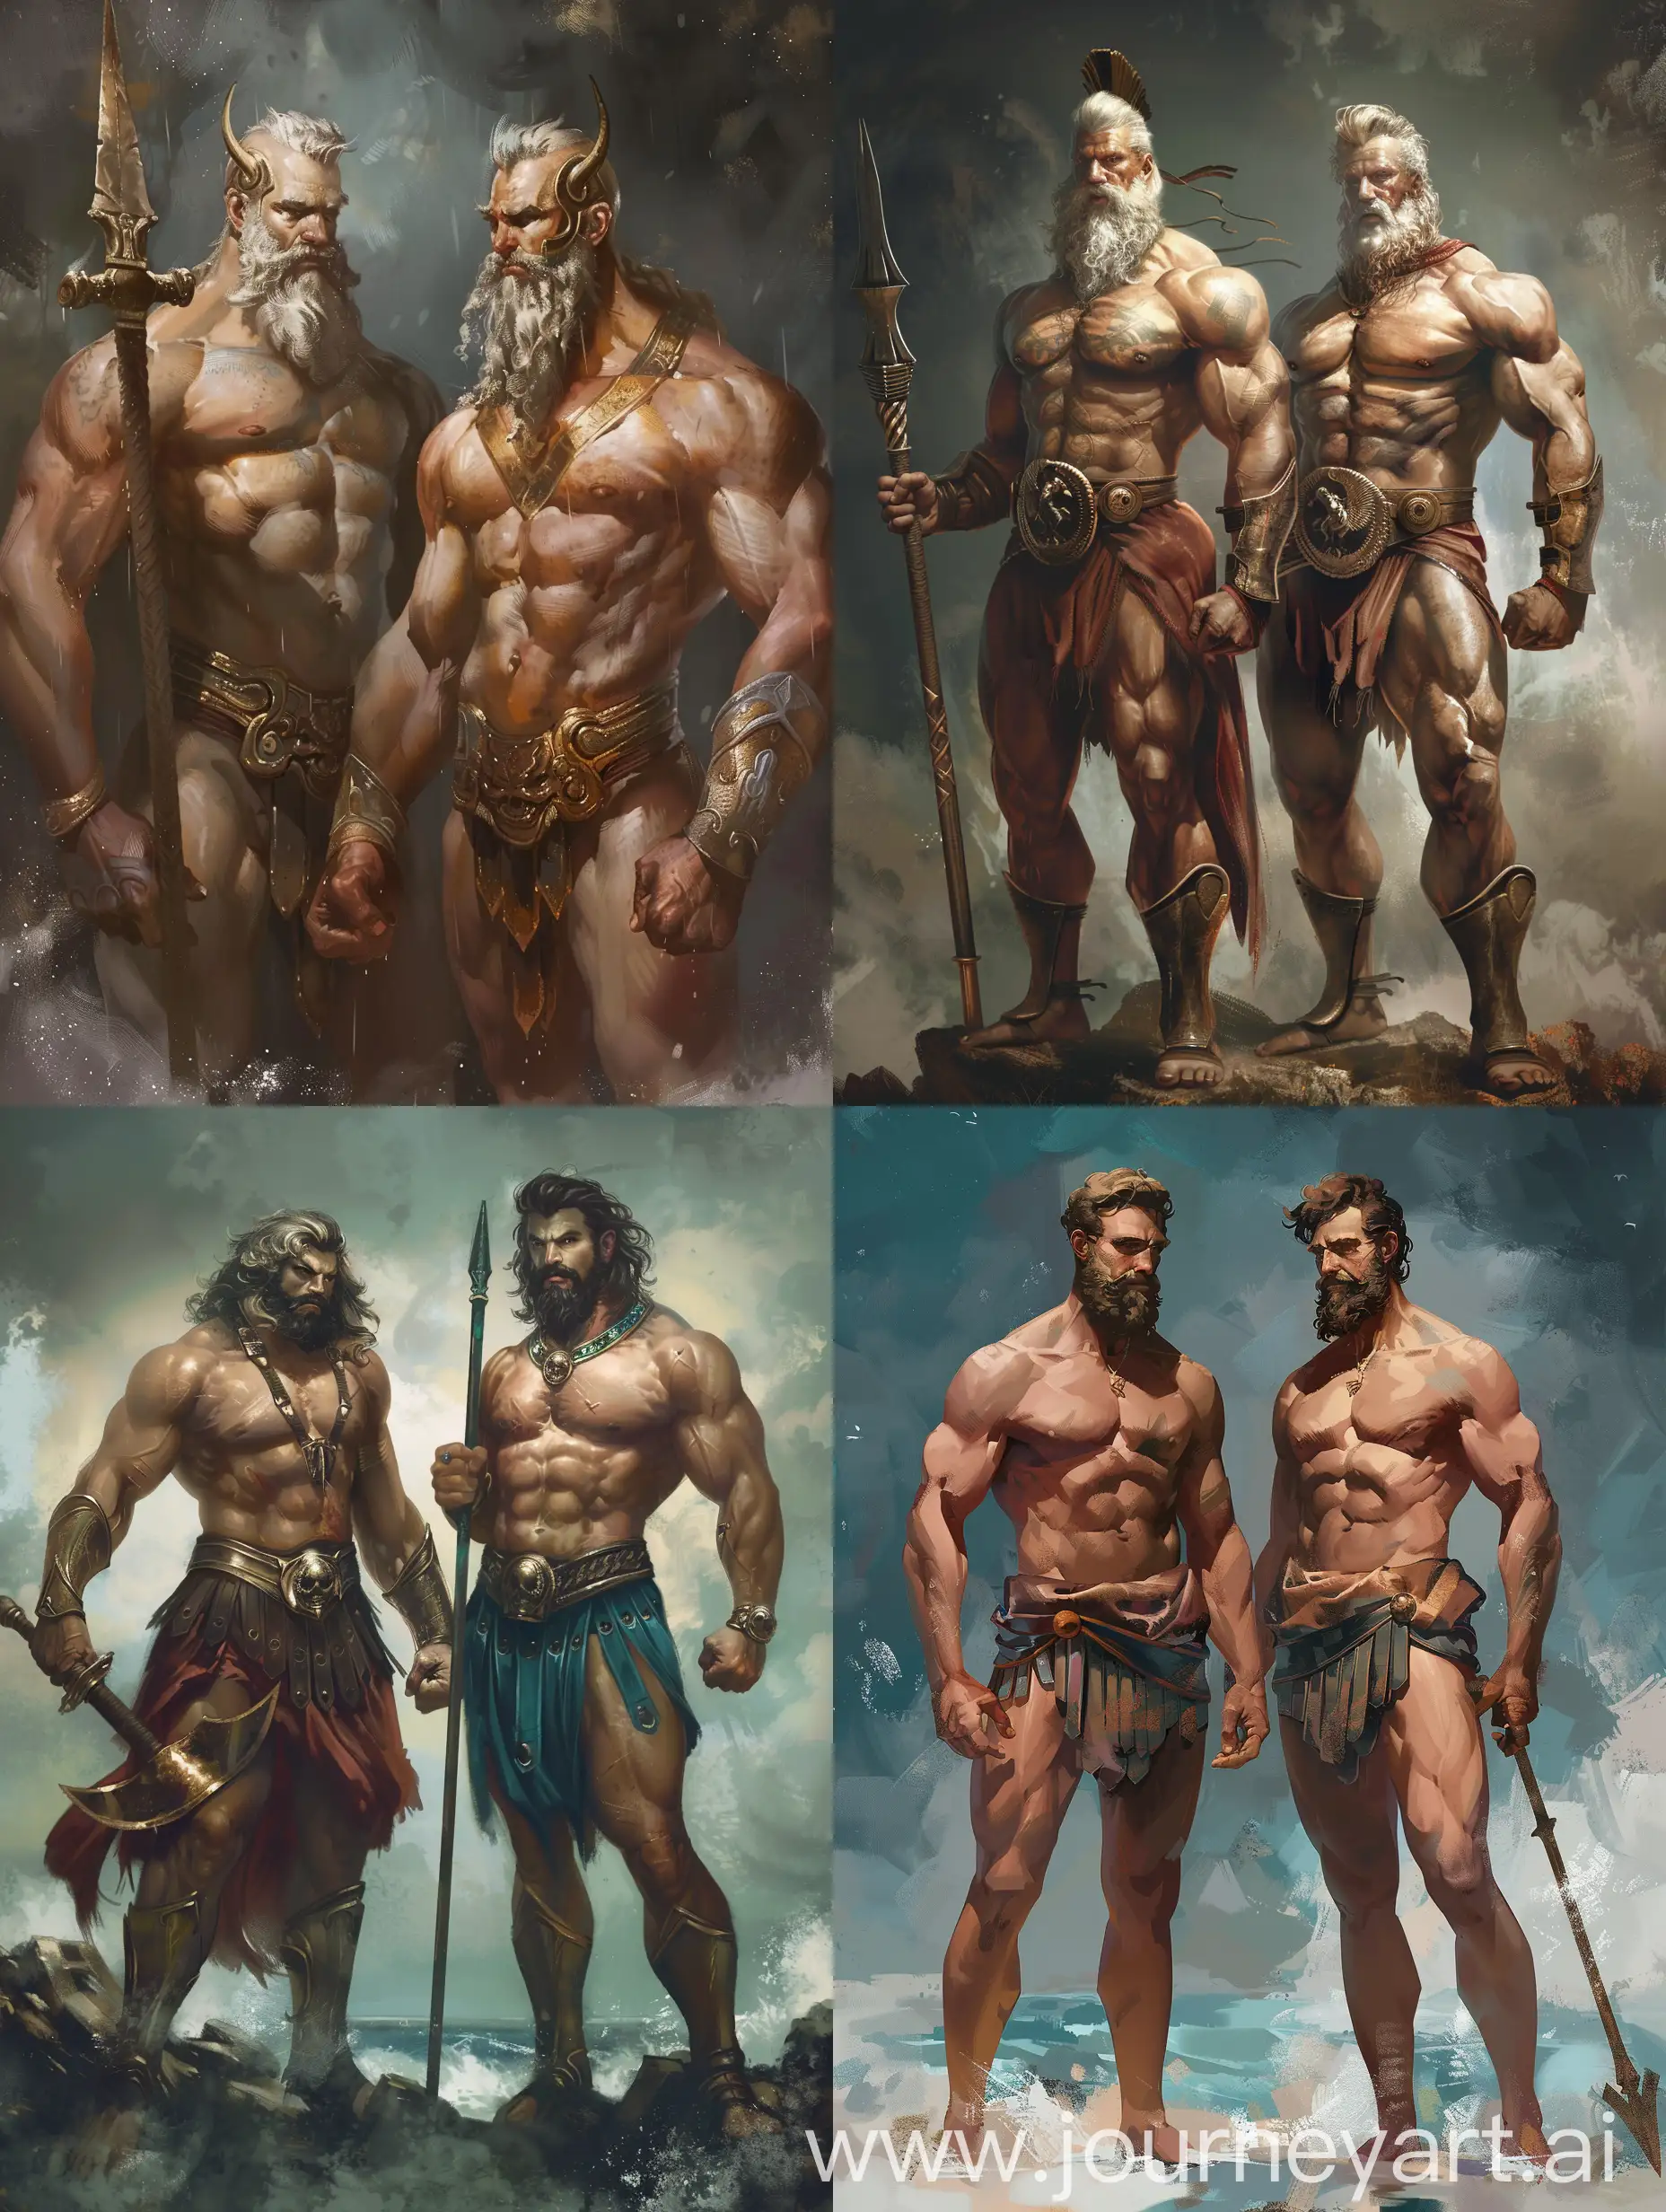 Two gods from Olympus, both male and muscular